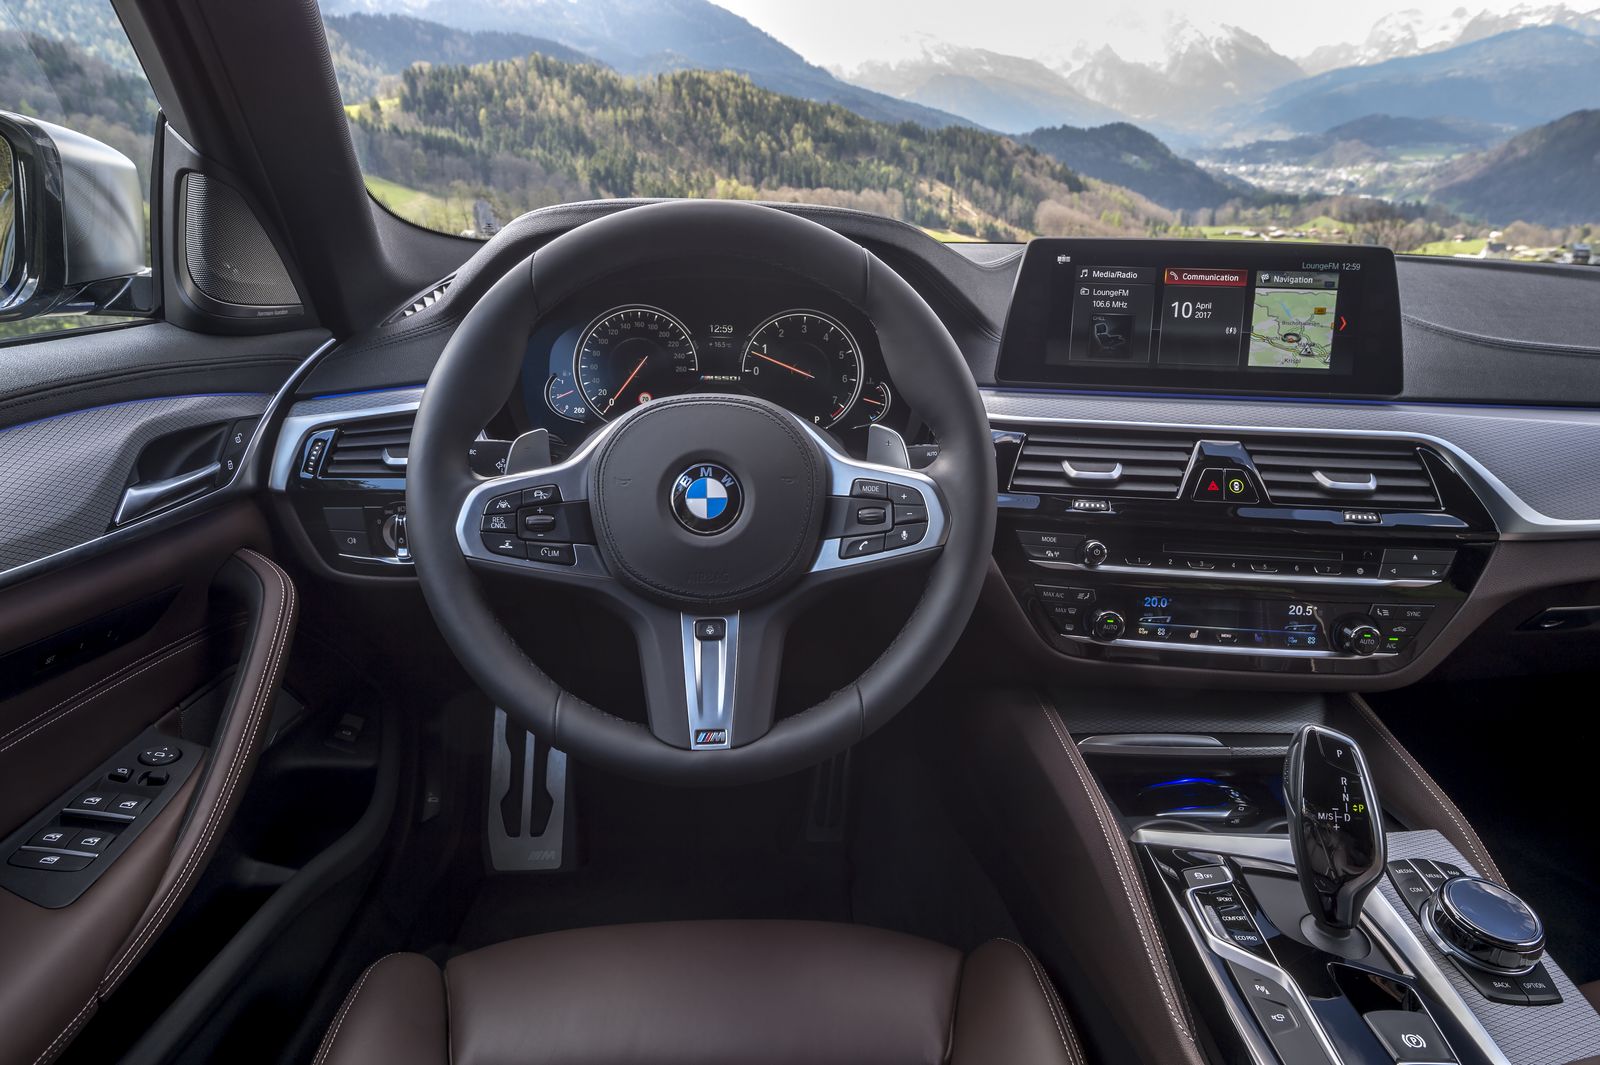 https://s1.cdn.autoevolution.com/images/news/gallery/bmw-squeezes-out-more-power-from-x3-m40i-x4-m40i-m550i-xdrive-in-the-us_14.jpg